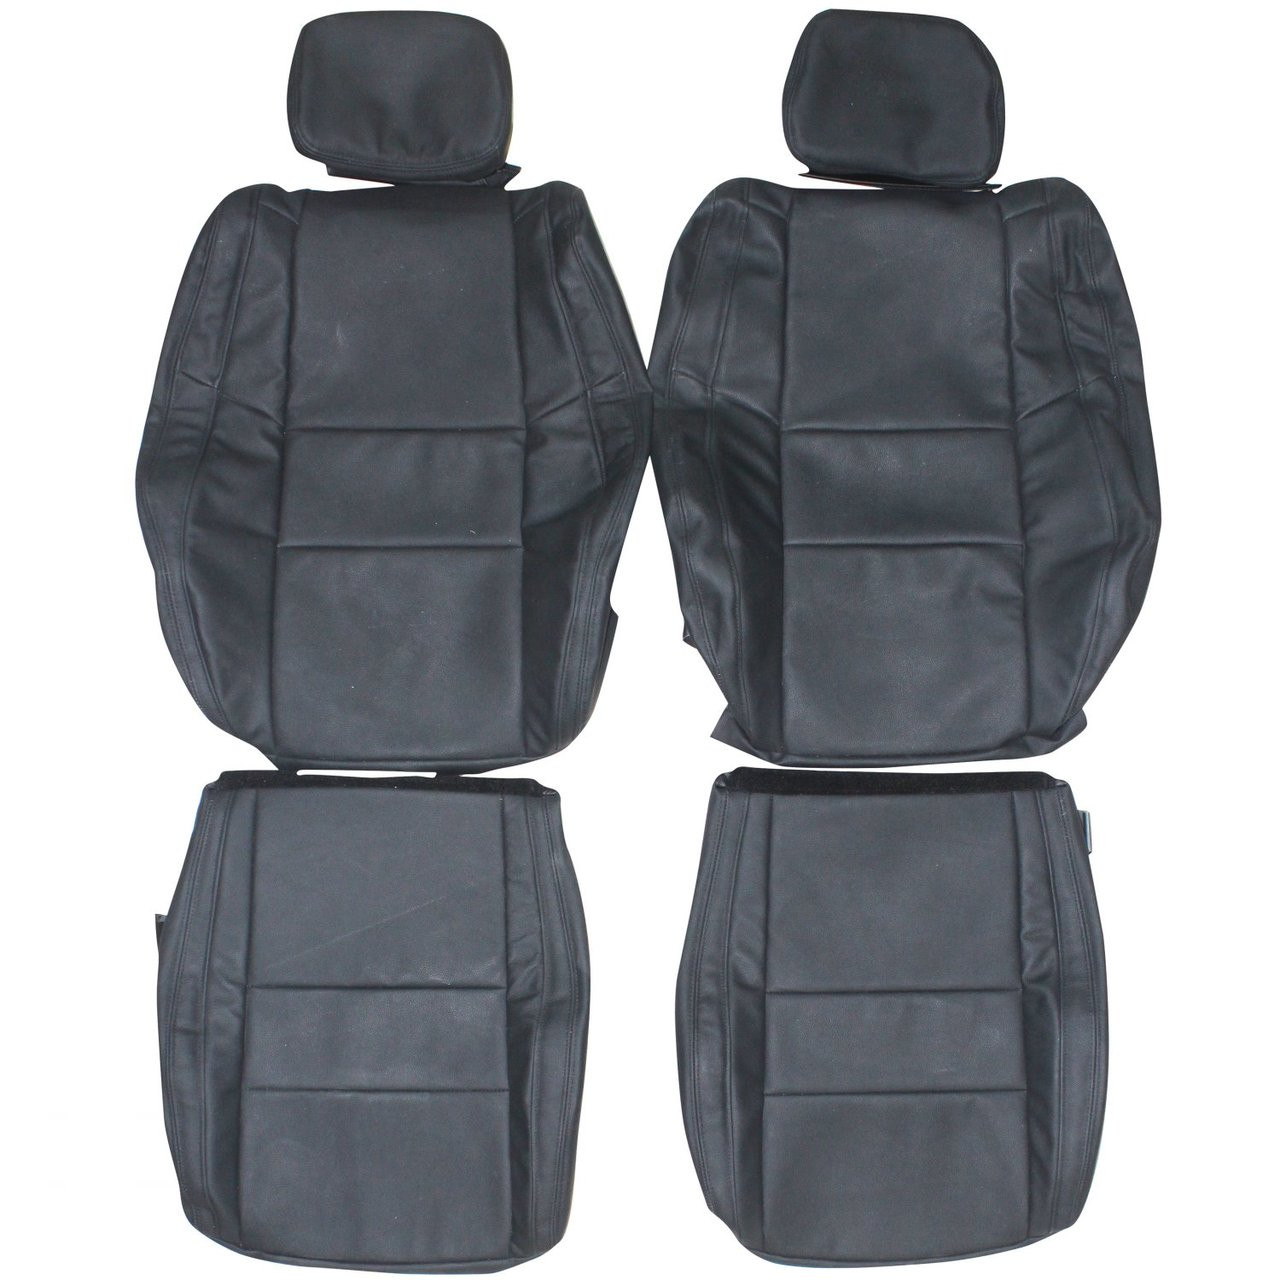 2011-2014 Jeep Cherokee Laredo Custom Real Leather Seat Covers (Front) -  Lseat.com